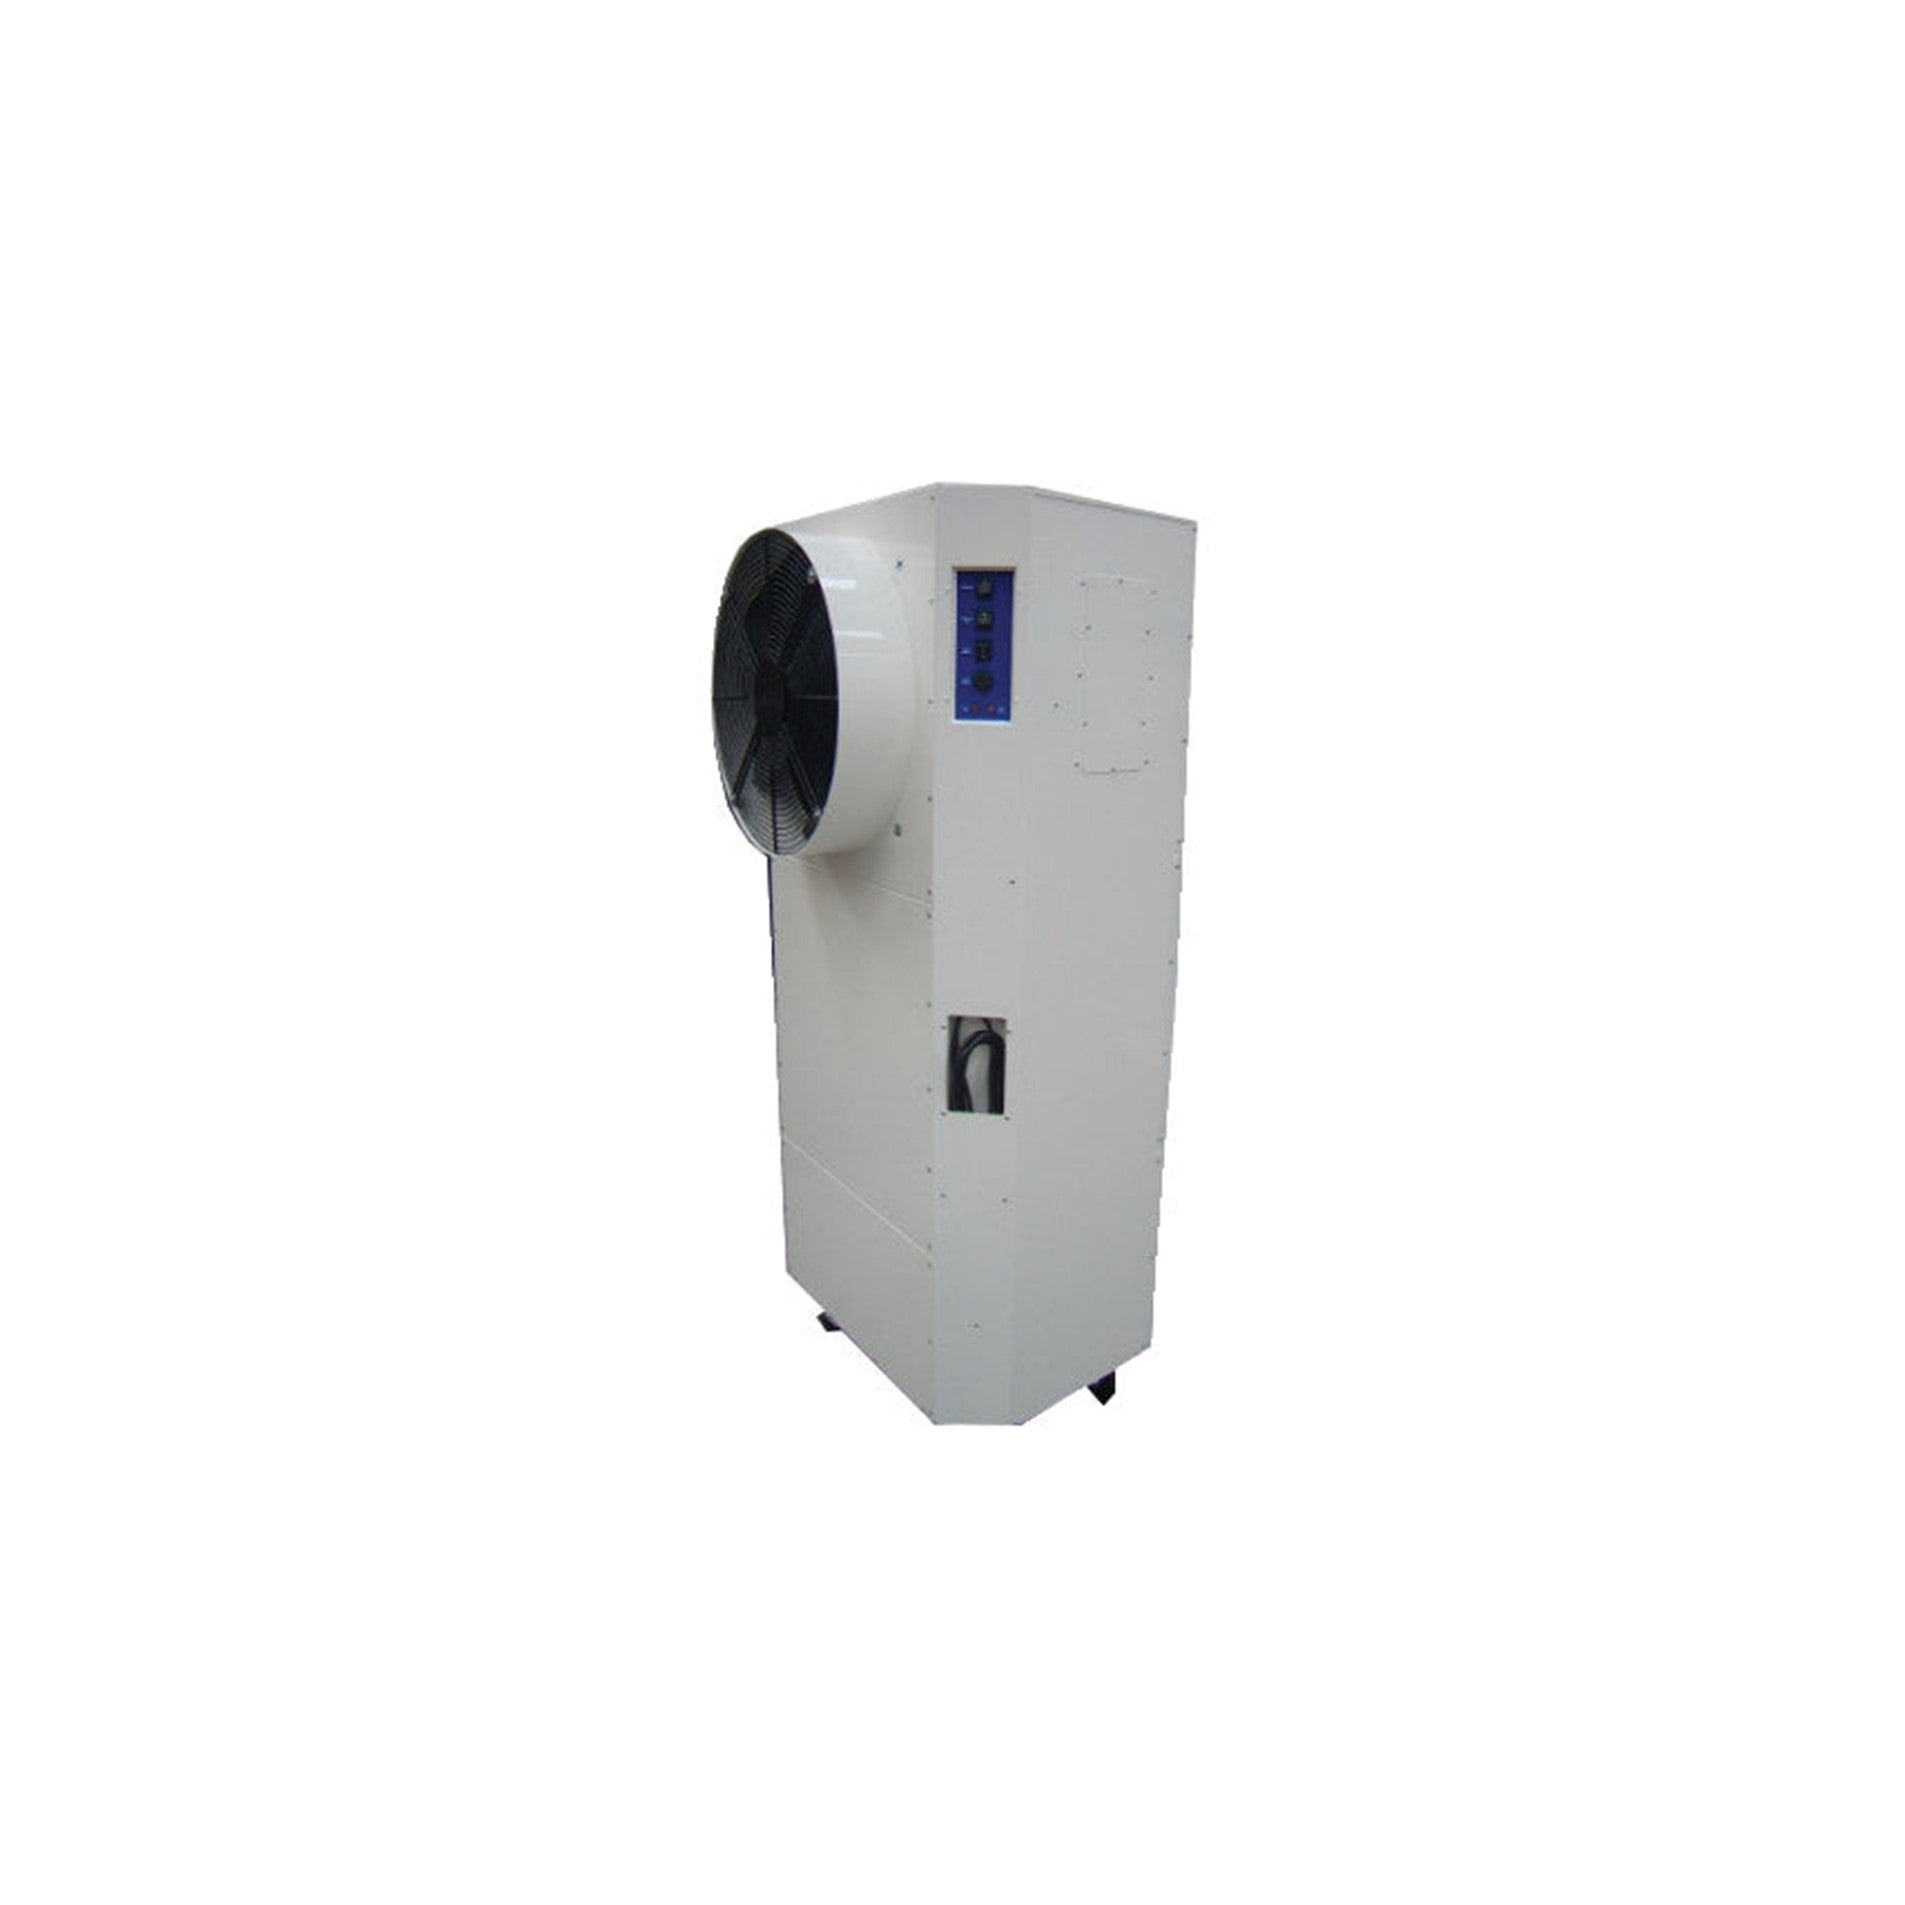 Image of a Broughton Evaporative Air Cooler on a white background